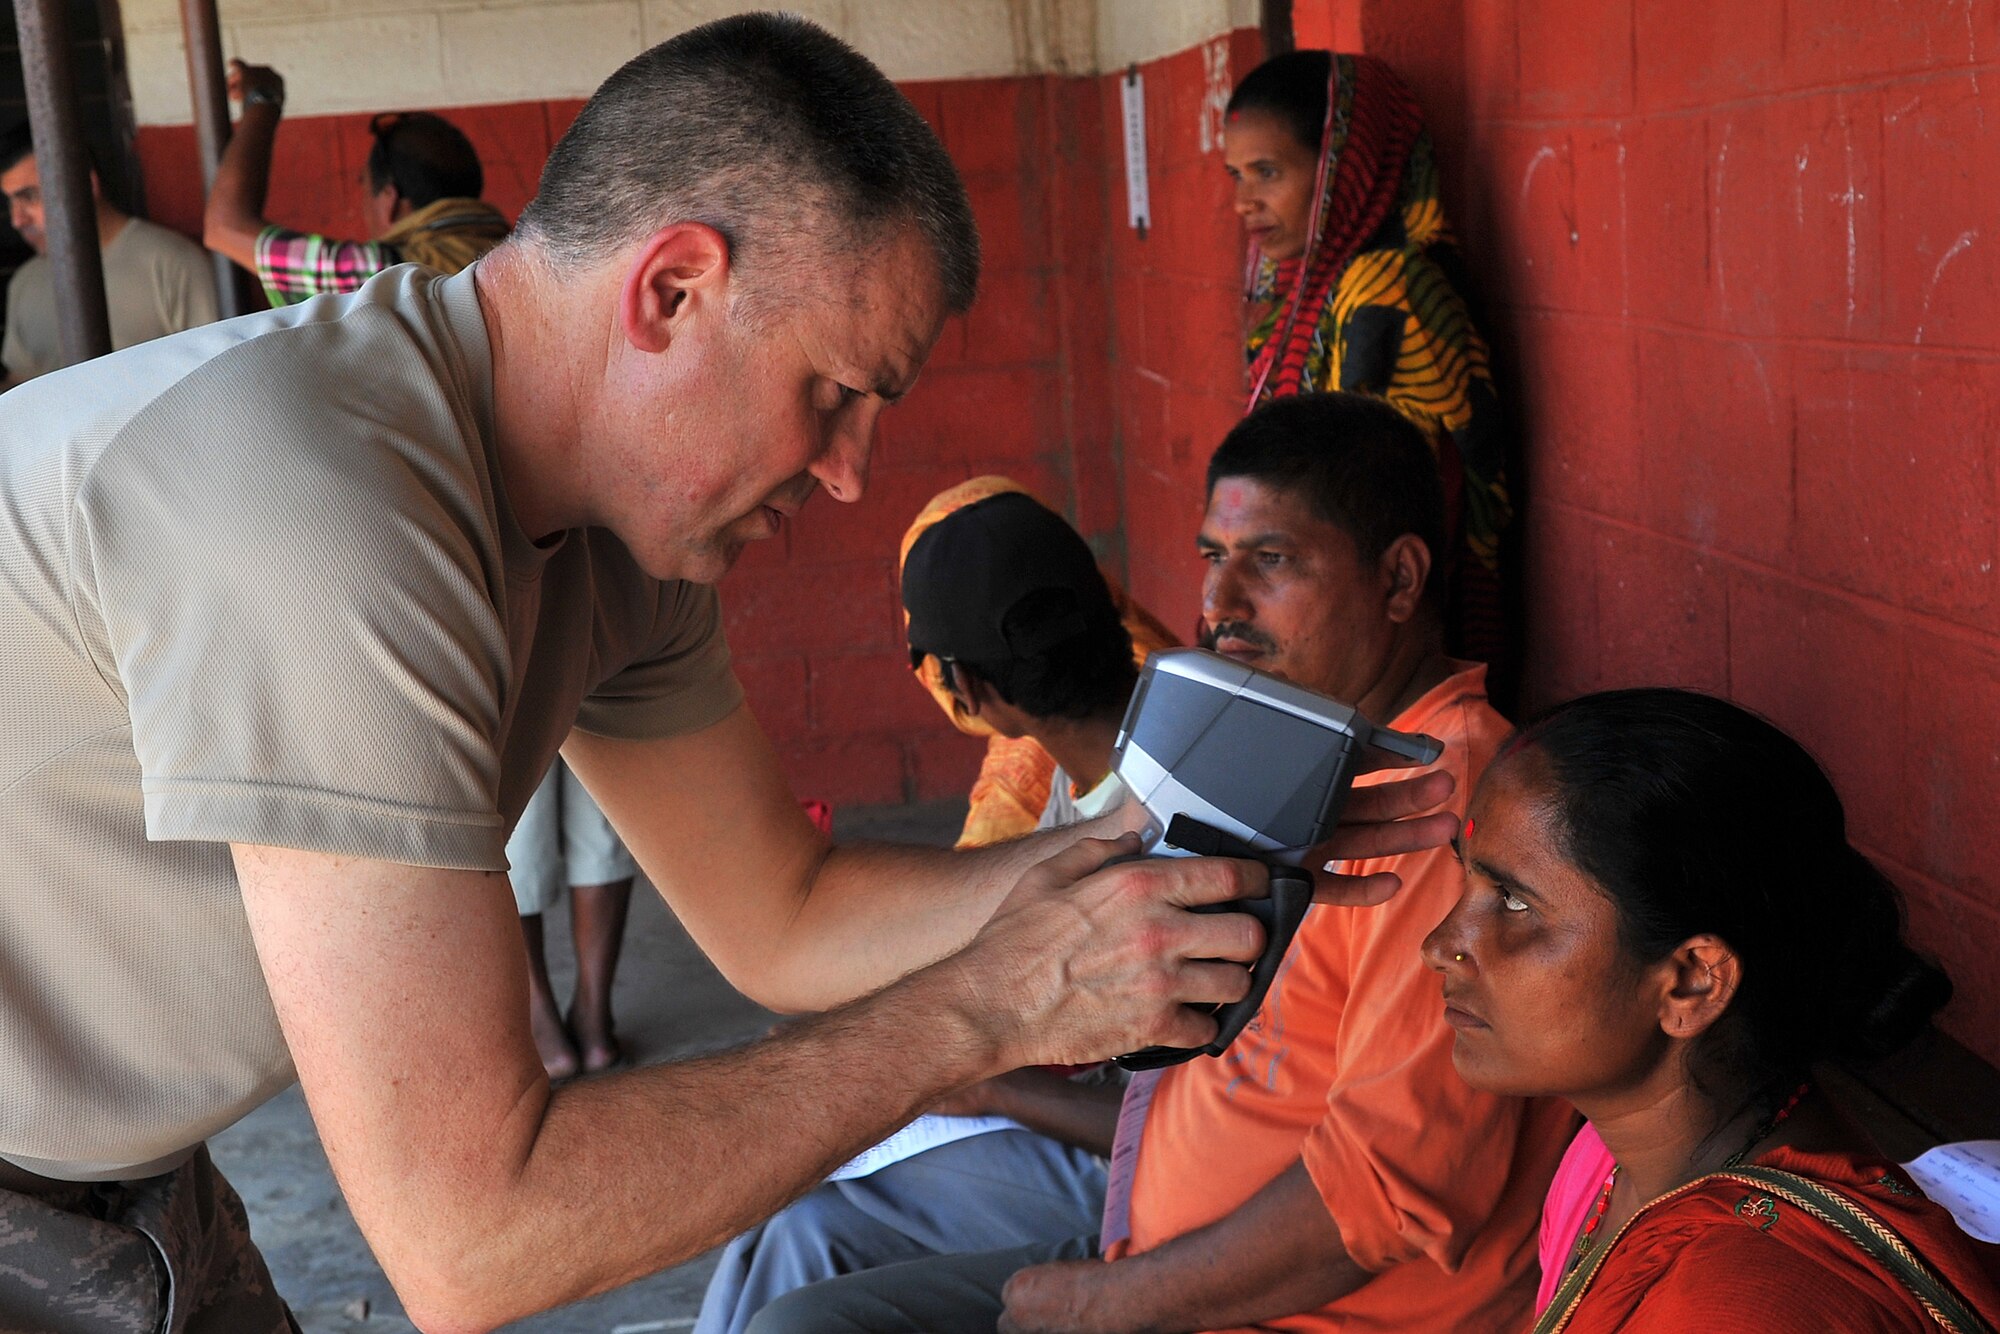 U.S. Air Force Master Sgt. Robert Shaw, Operation Pacific Angel-Nepal optometry technician, performs auto refraction screening on patients at a health services outreach site in Manahari, Nepal, Sept. 8, 2014. PACANGEL supports U.S. Pacific Command’s capacity-building efforts by partnering with other governments, non-governmental agencies and multilateral militaries in the respective region to provide medical, dental, optometry and engineering assistance to their citizens. (U.S. Air Force photo by Staff Sgt. Melissa B. White/Released)